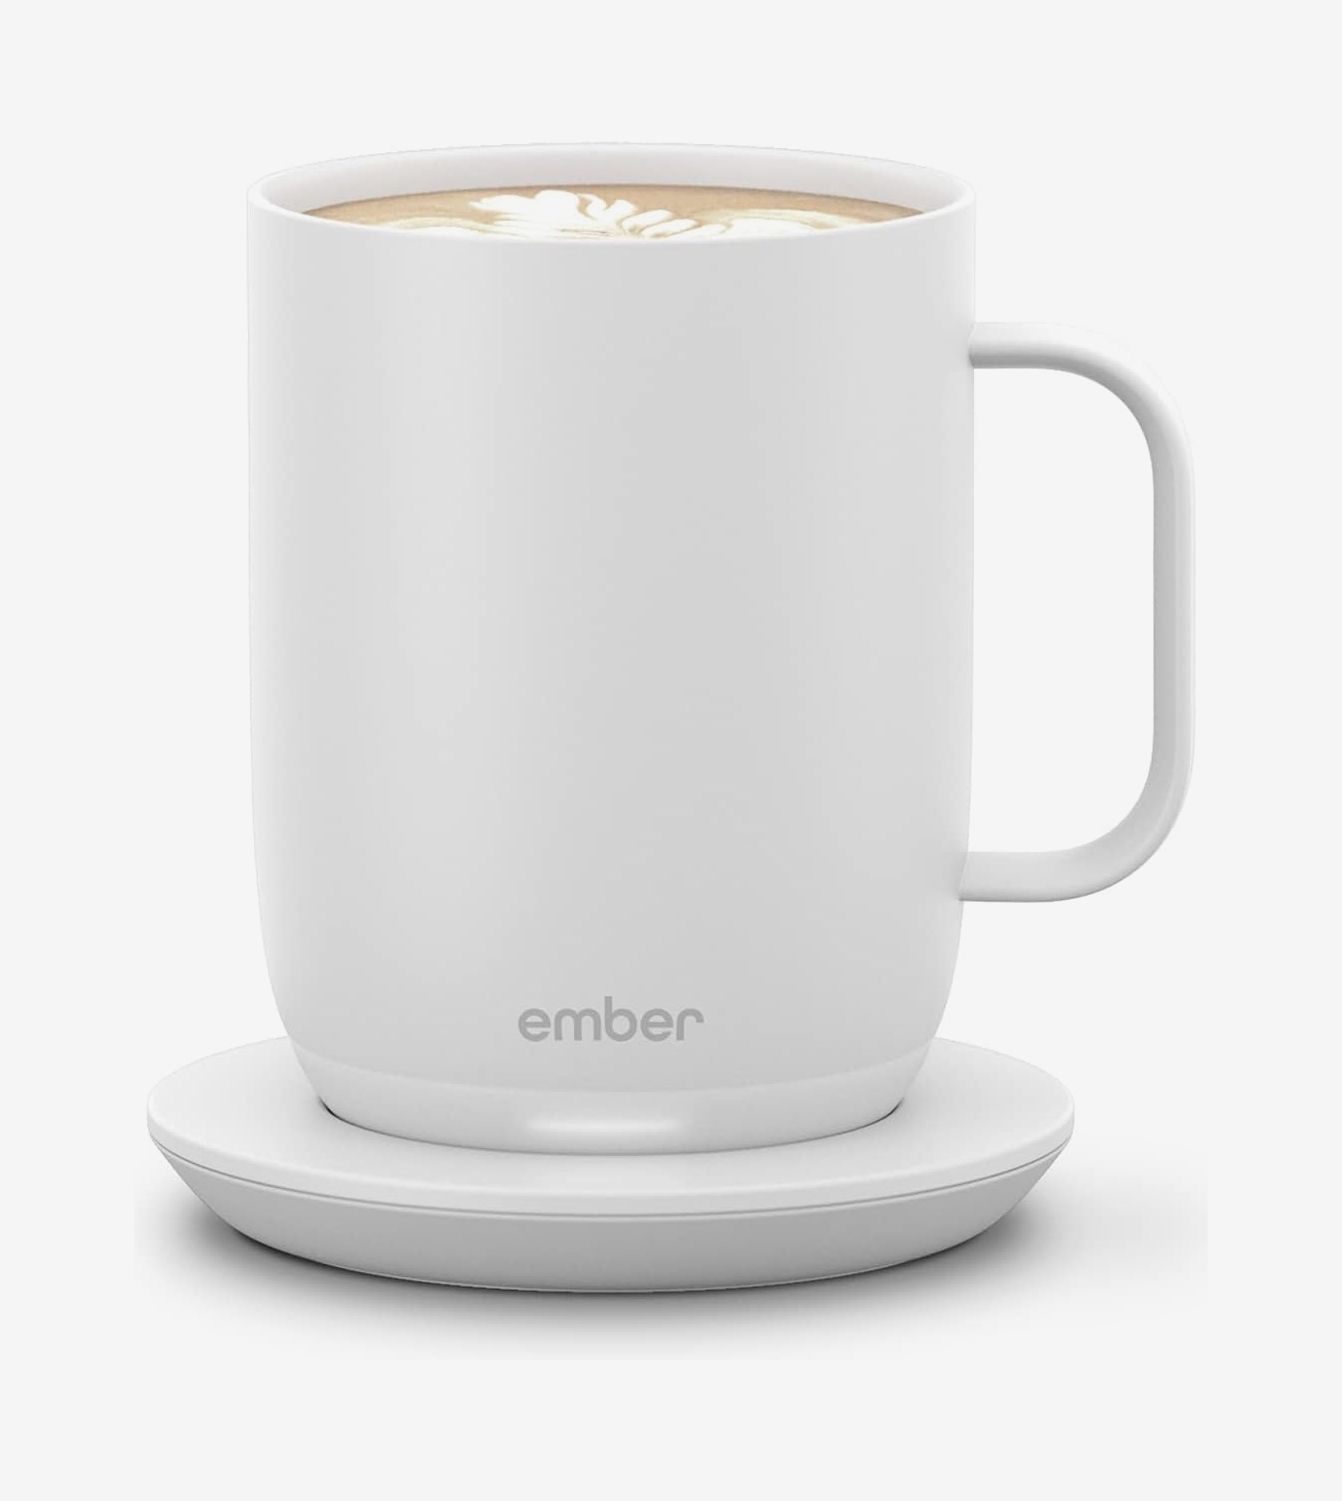 This temperature-controlled coffee mug is the ultimate gift